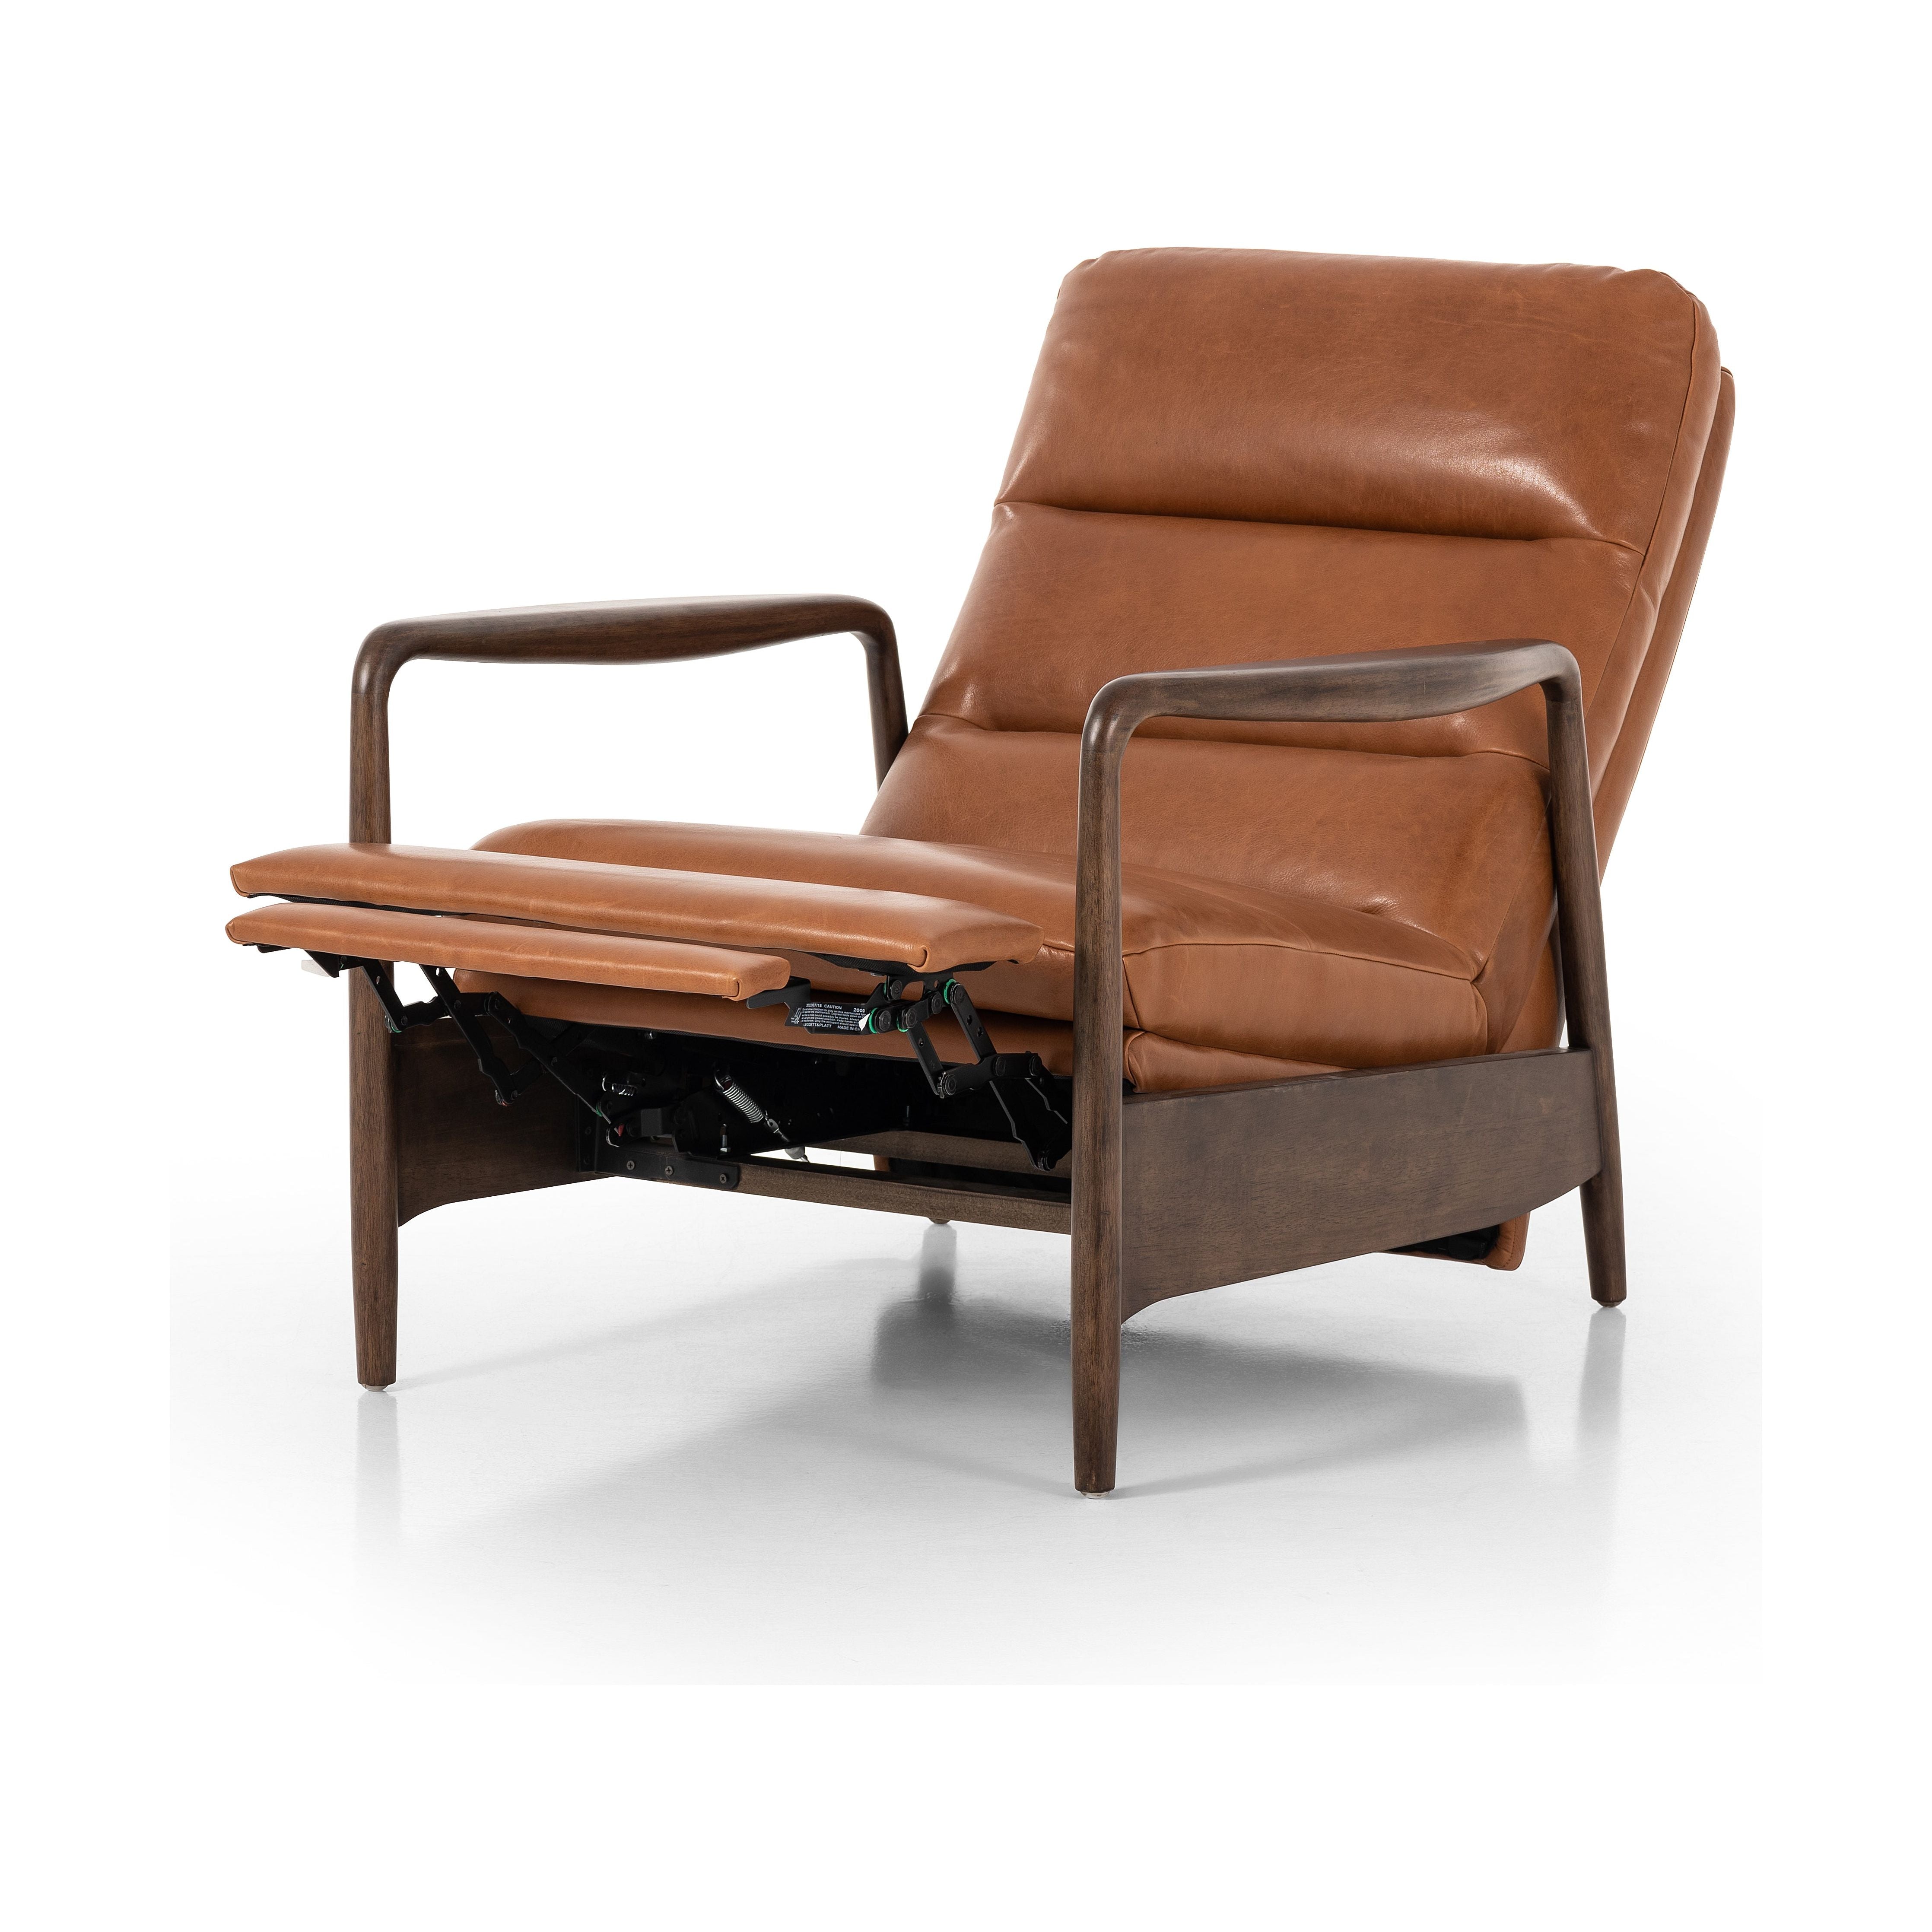 A sleek seat with hidden push-back reclining functionality. This midcentury-inspired recliner features wide chunky channeling paired with slim paddle arms and a tapered wood frame. Designed with a high seat and high back for extra comfy support. Upholstered in a timeless tobacco-hued leather made in a family-owned tannery in Thailand. Amethyst Home provides interior design, new construction, custom furniture, and area rugs in the Kansas City metro area.